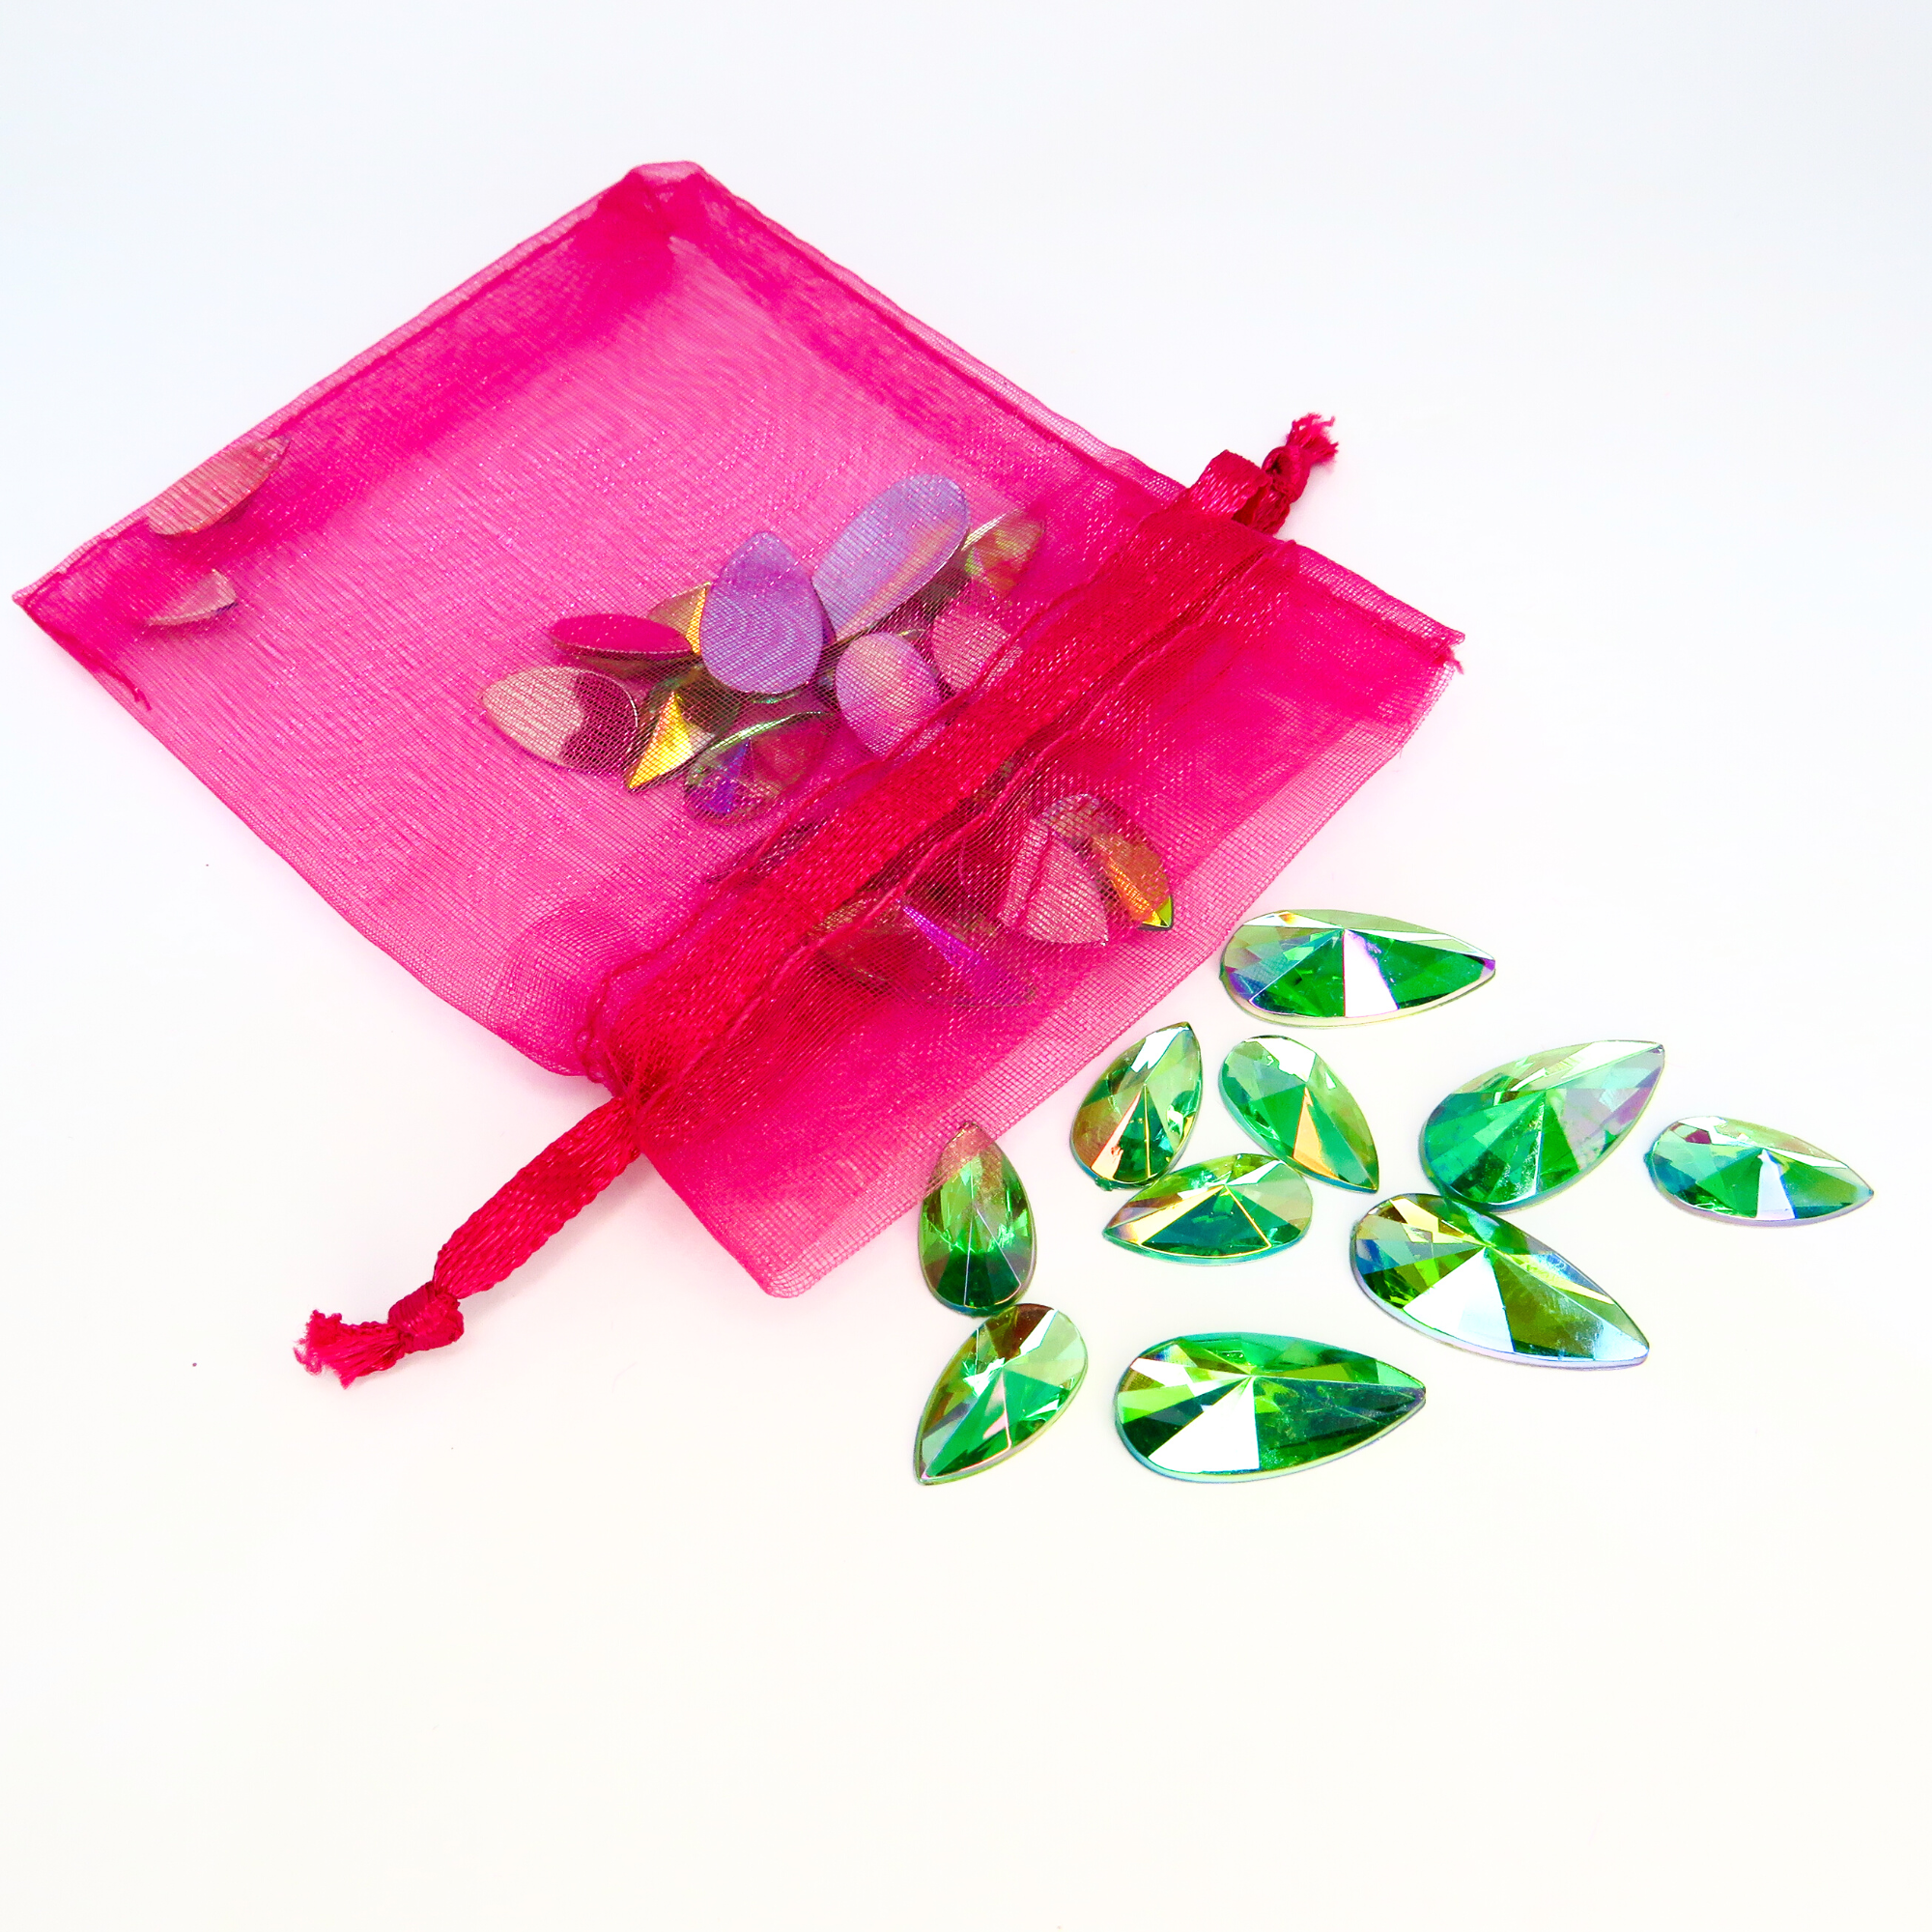 Lime soda green reusable festival face and body gems come in a mini pink organza bag to keep them safe after use.